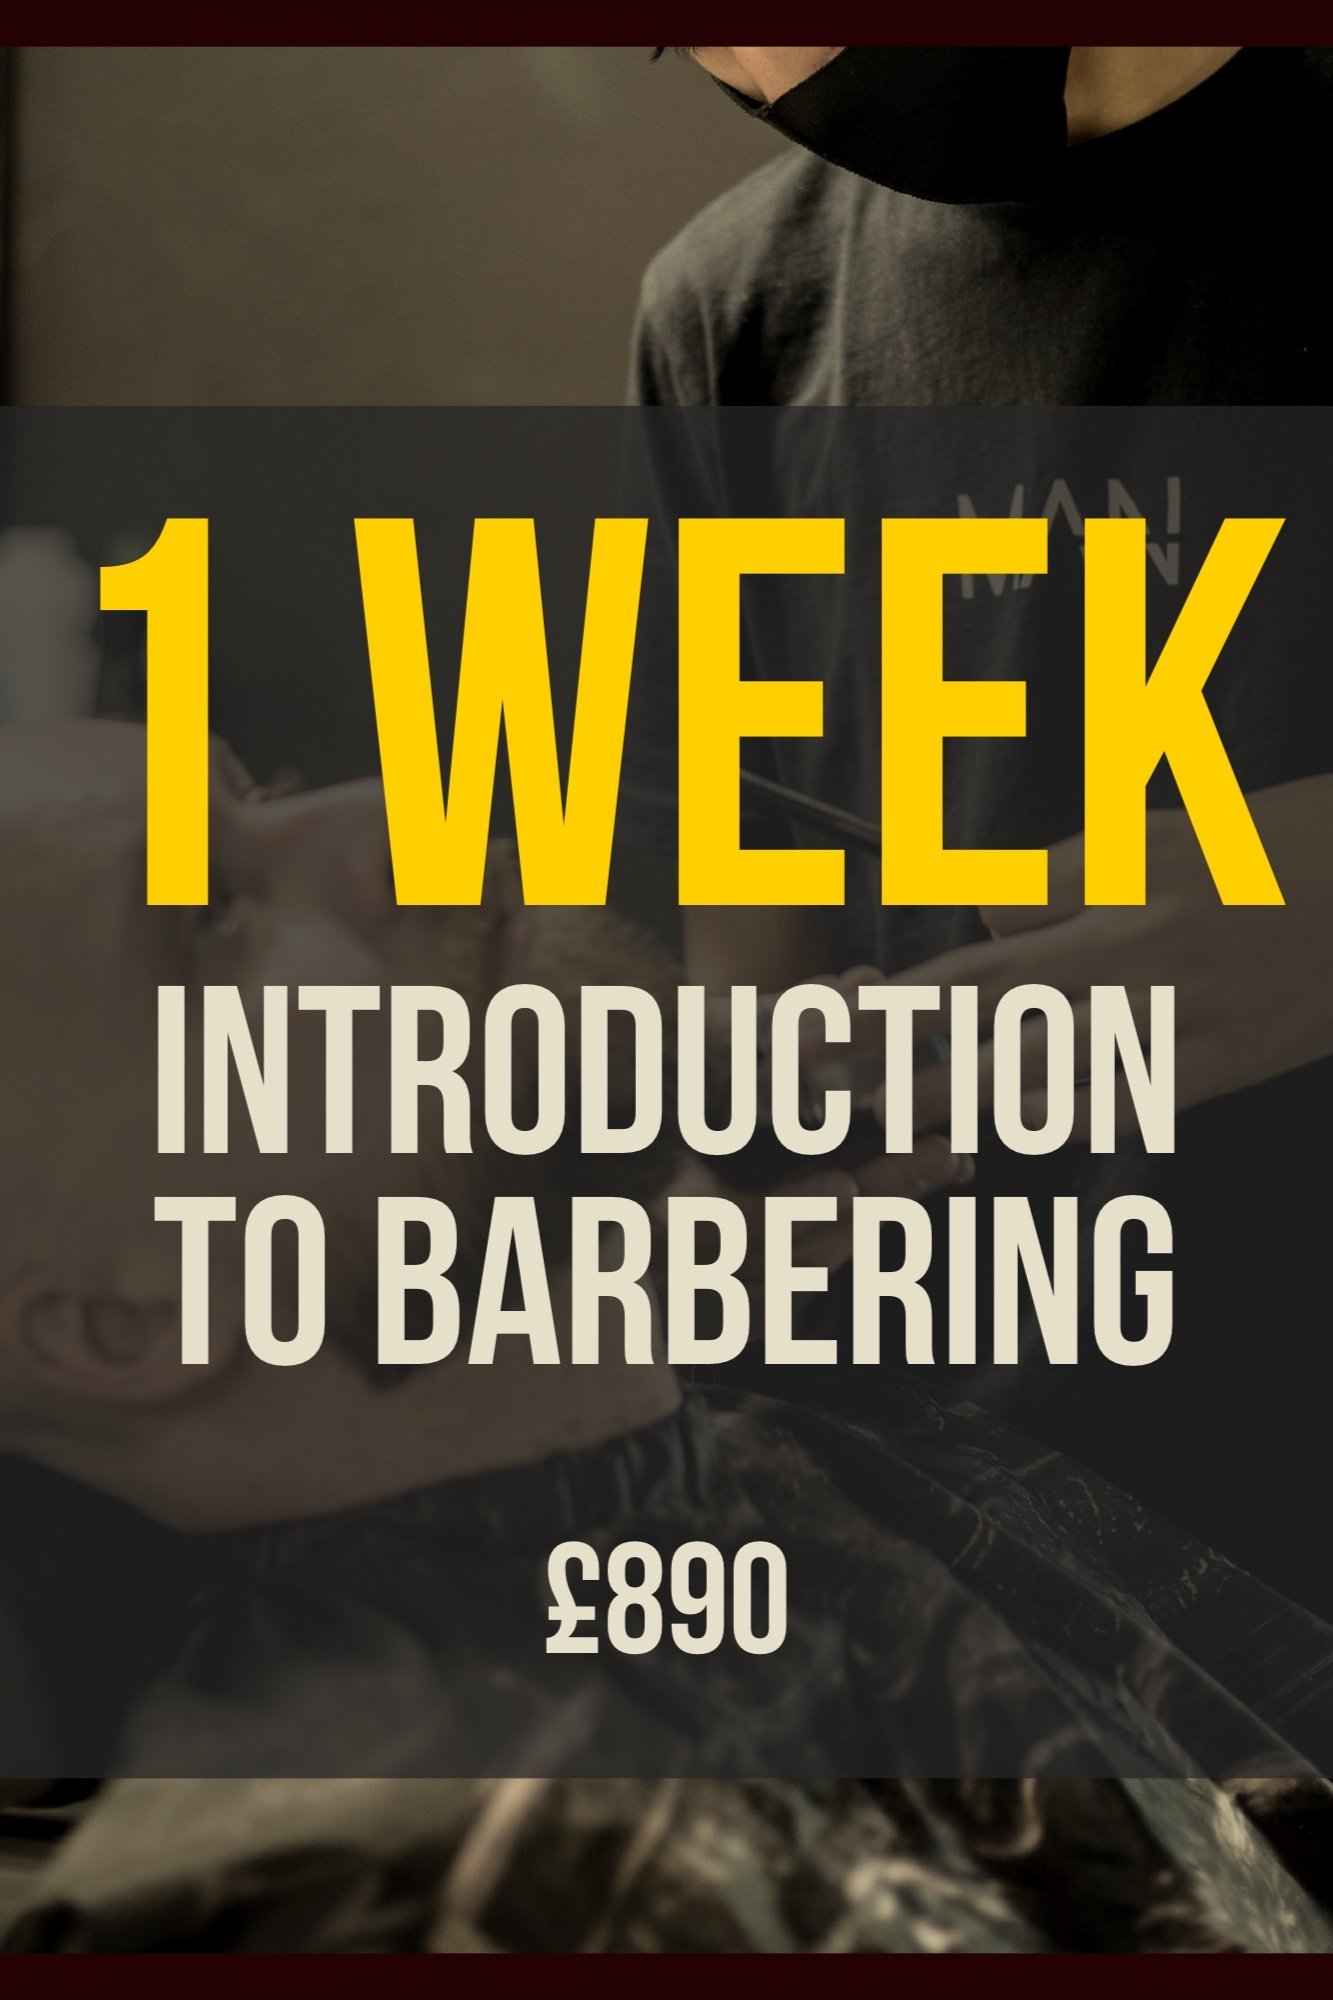 1 week Introduction to barbering